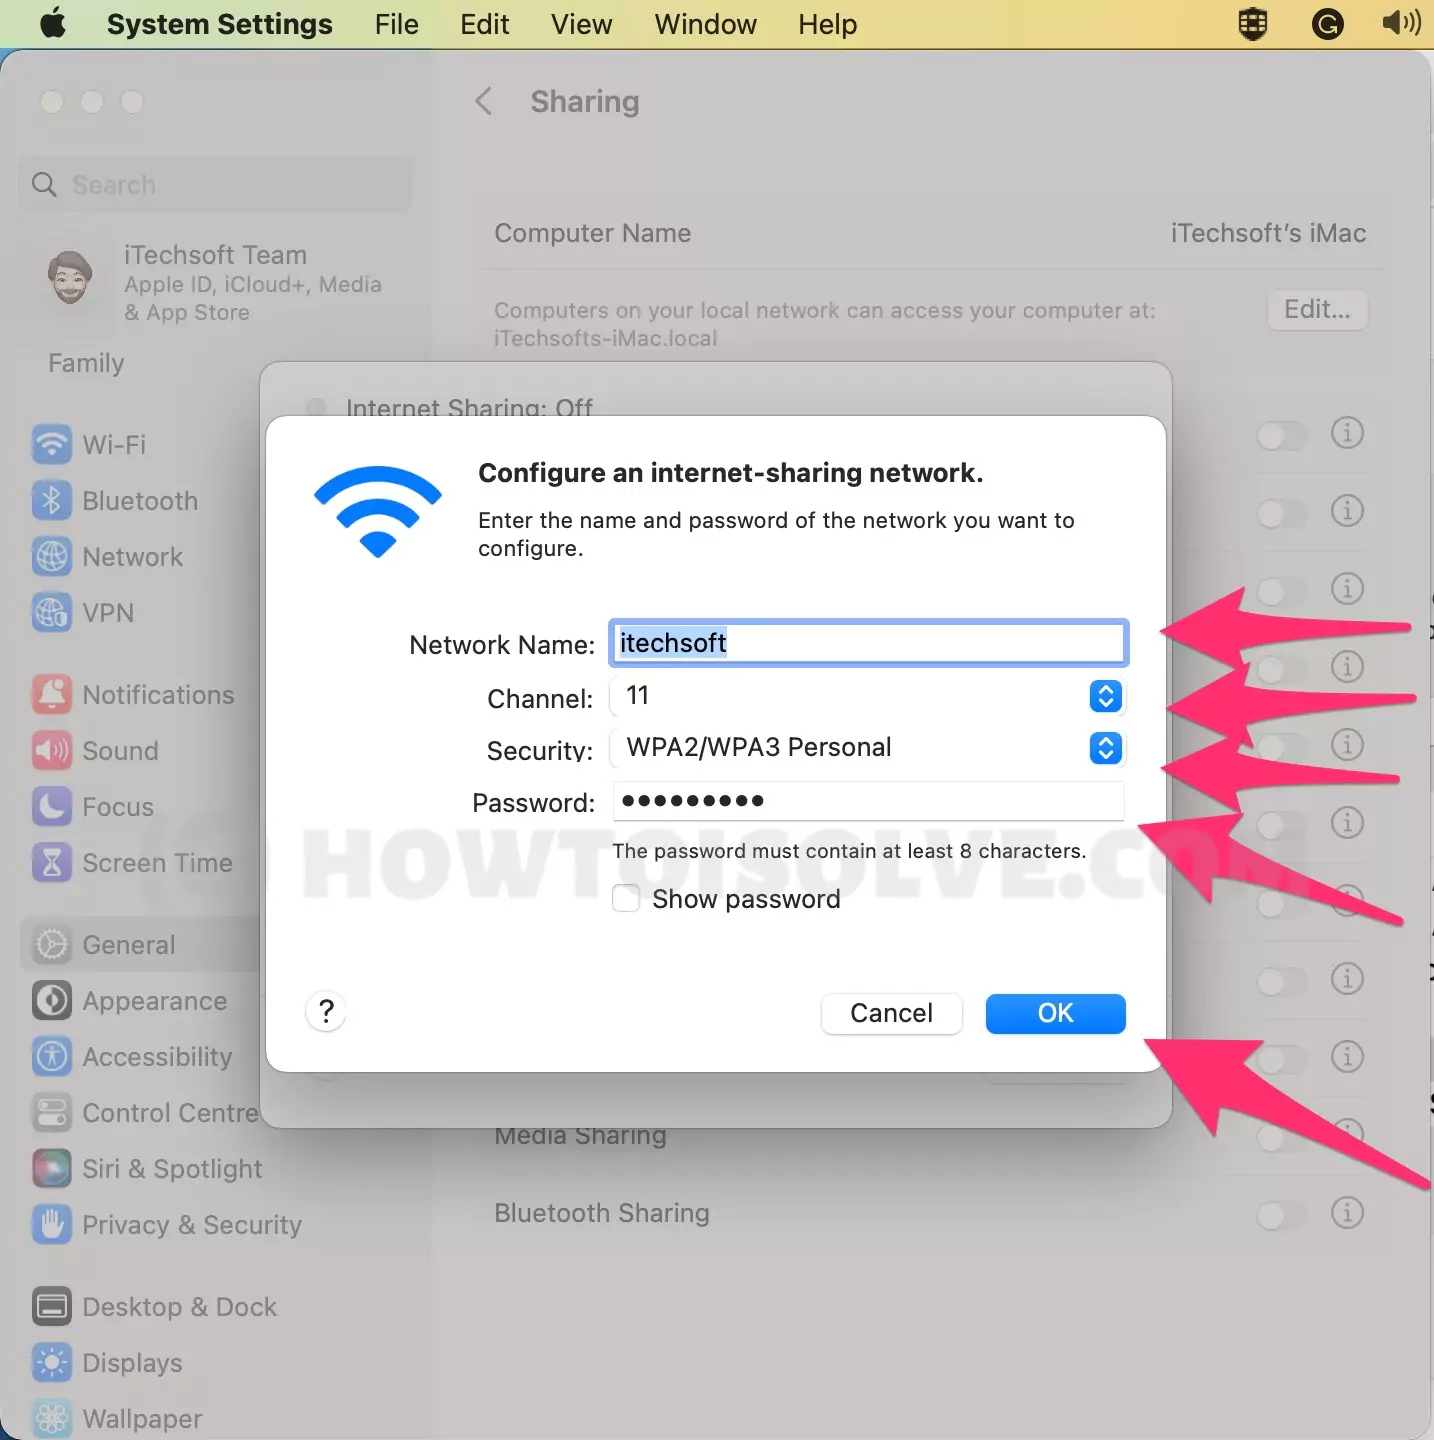 set-wifi-password-for-your-internet-sharing-connection-on-mac